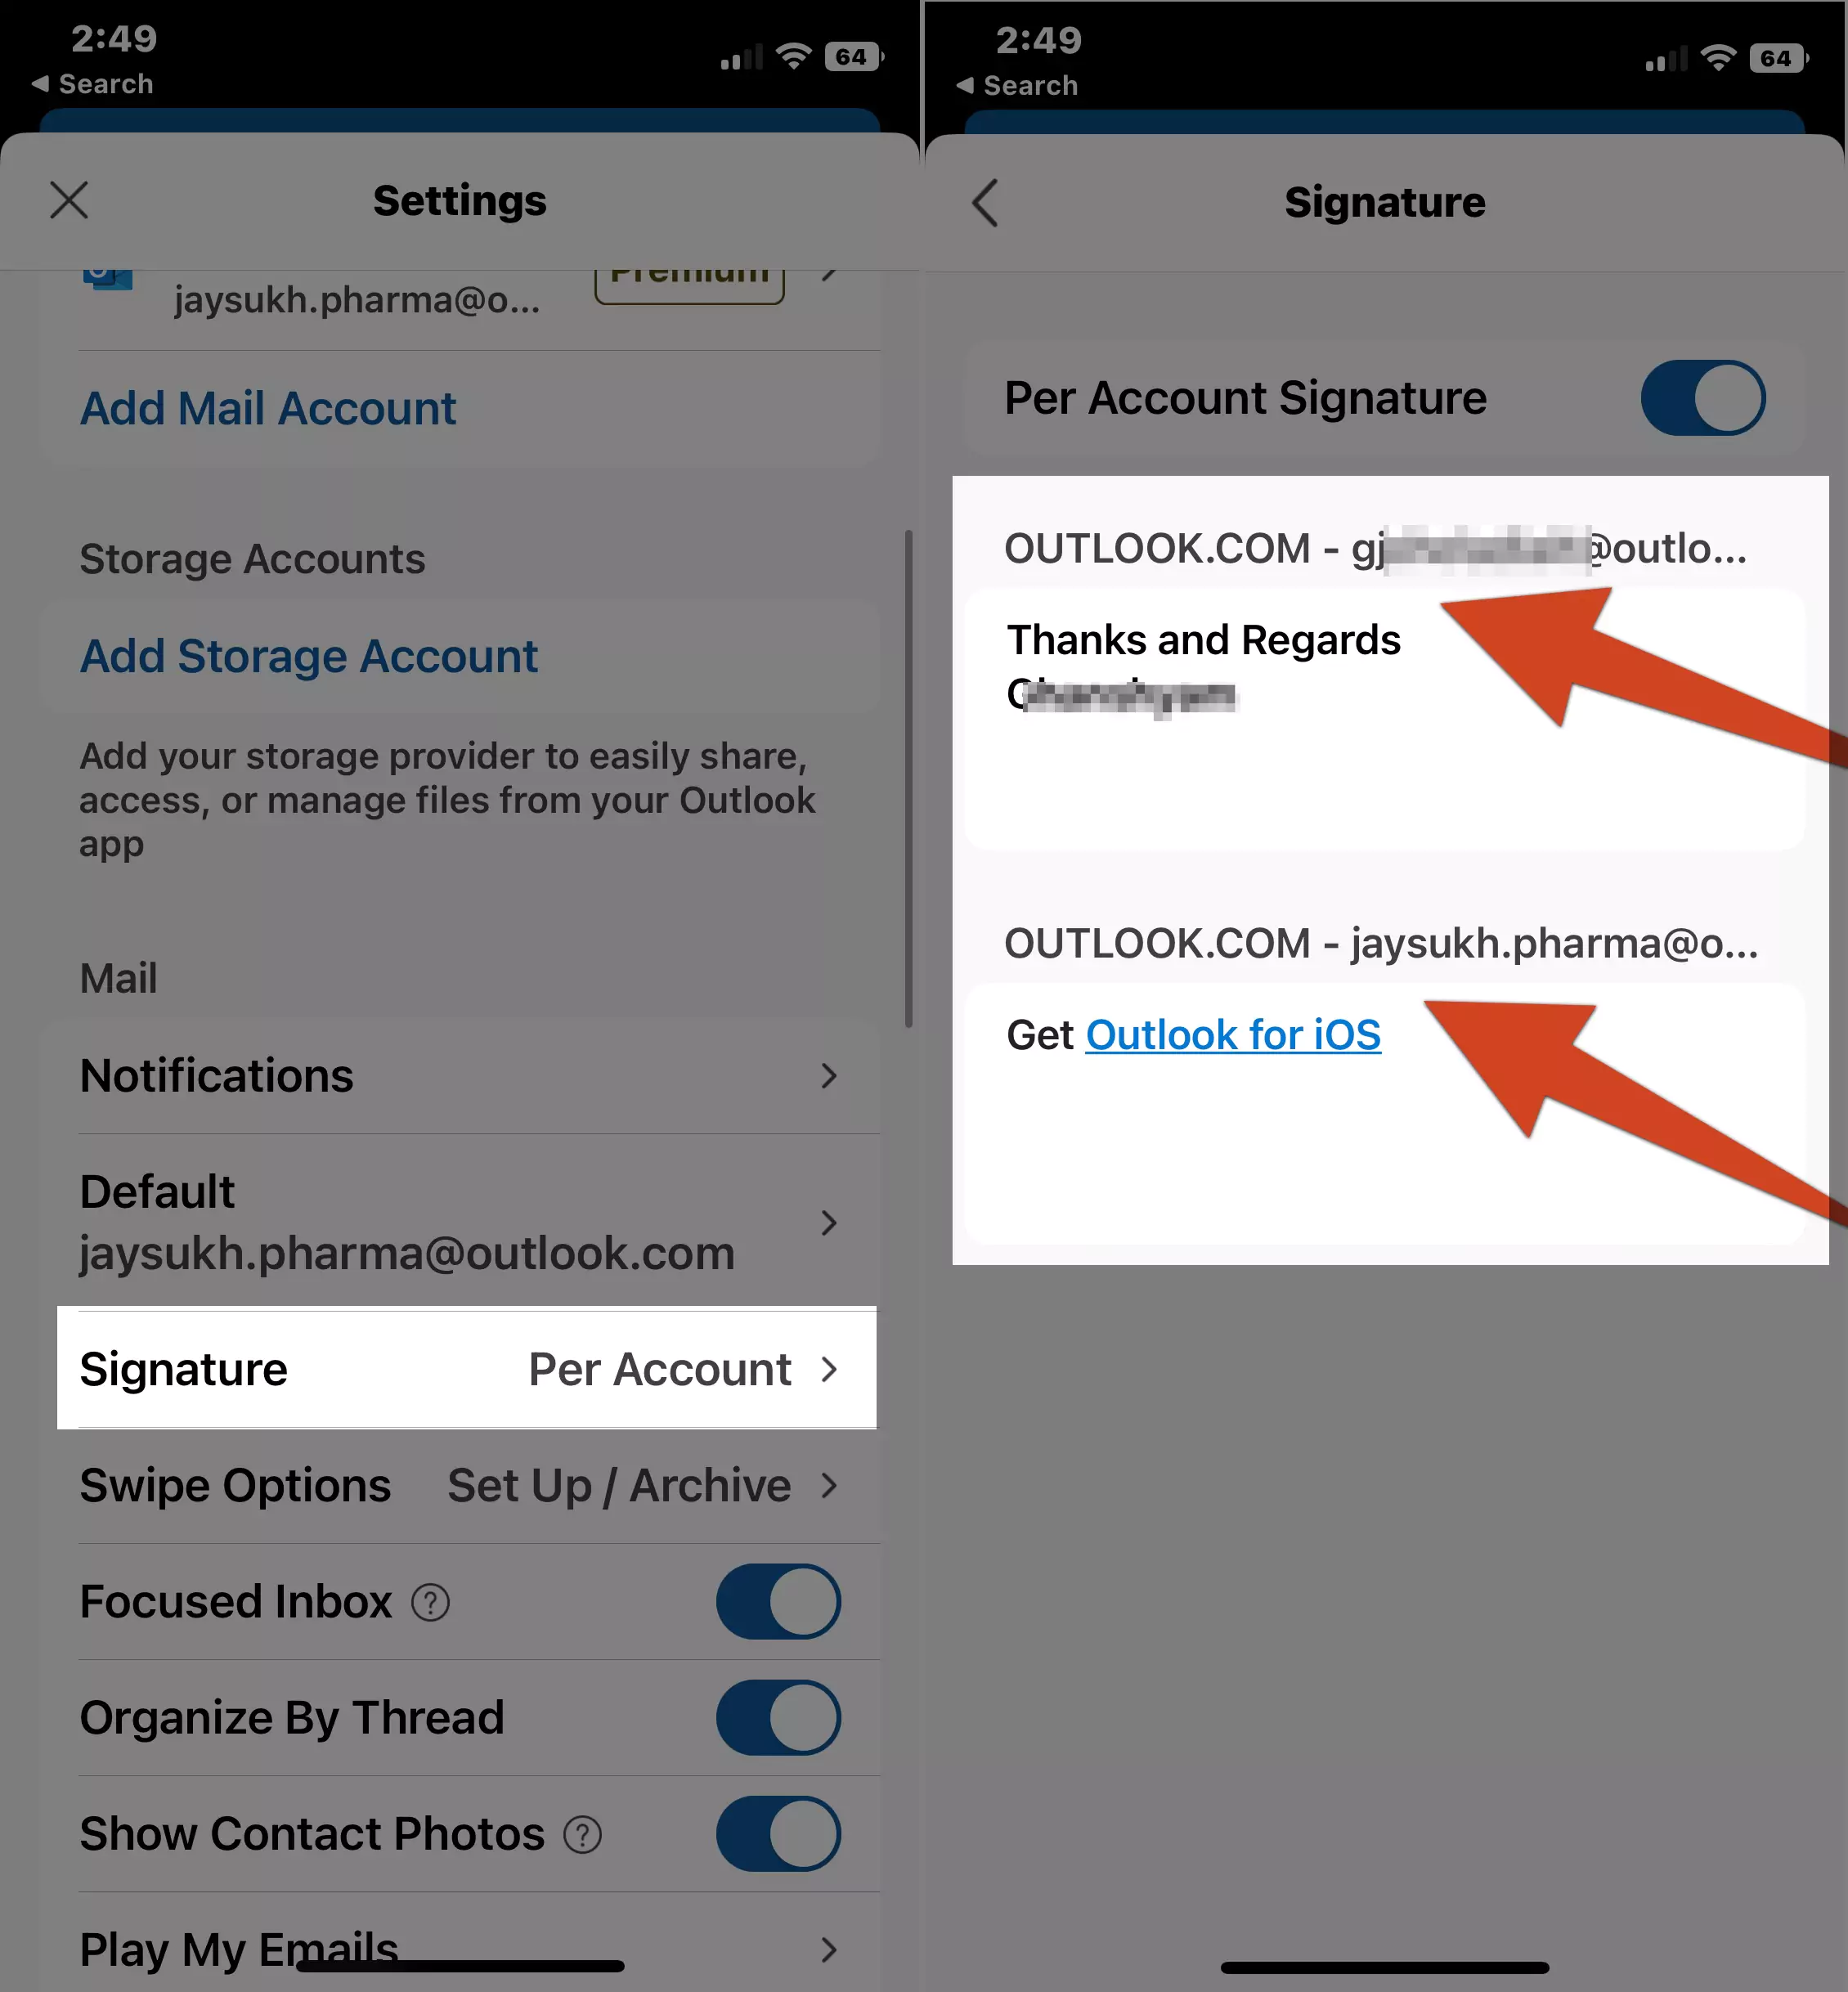 change-signature-settings-in-outlook-ios-app